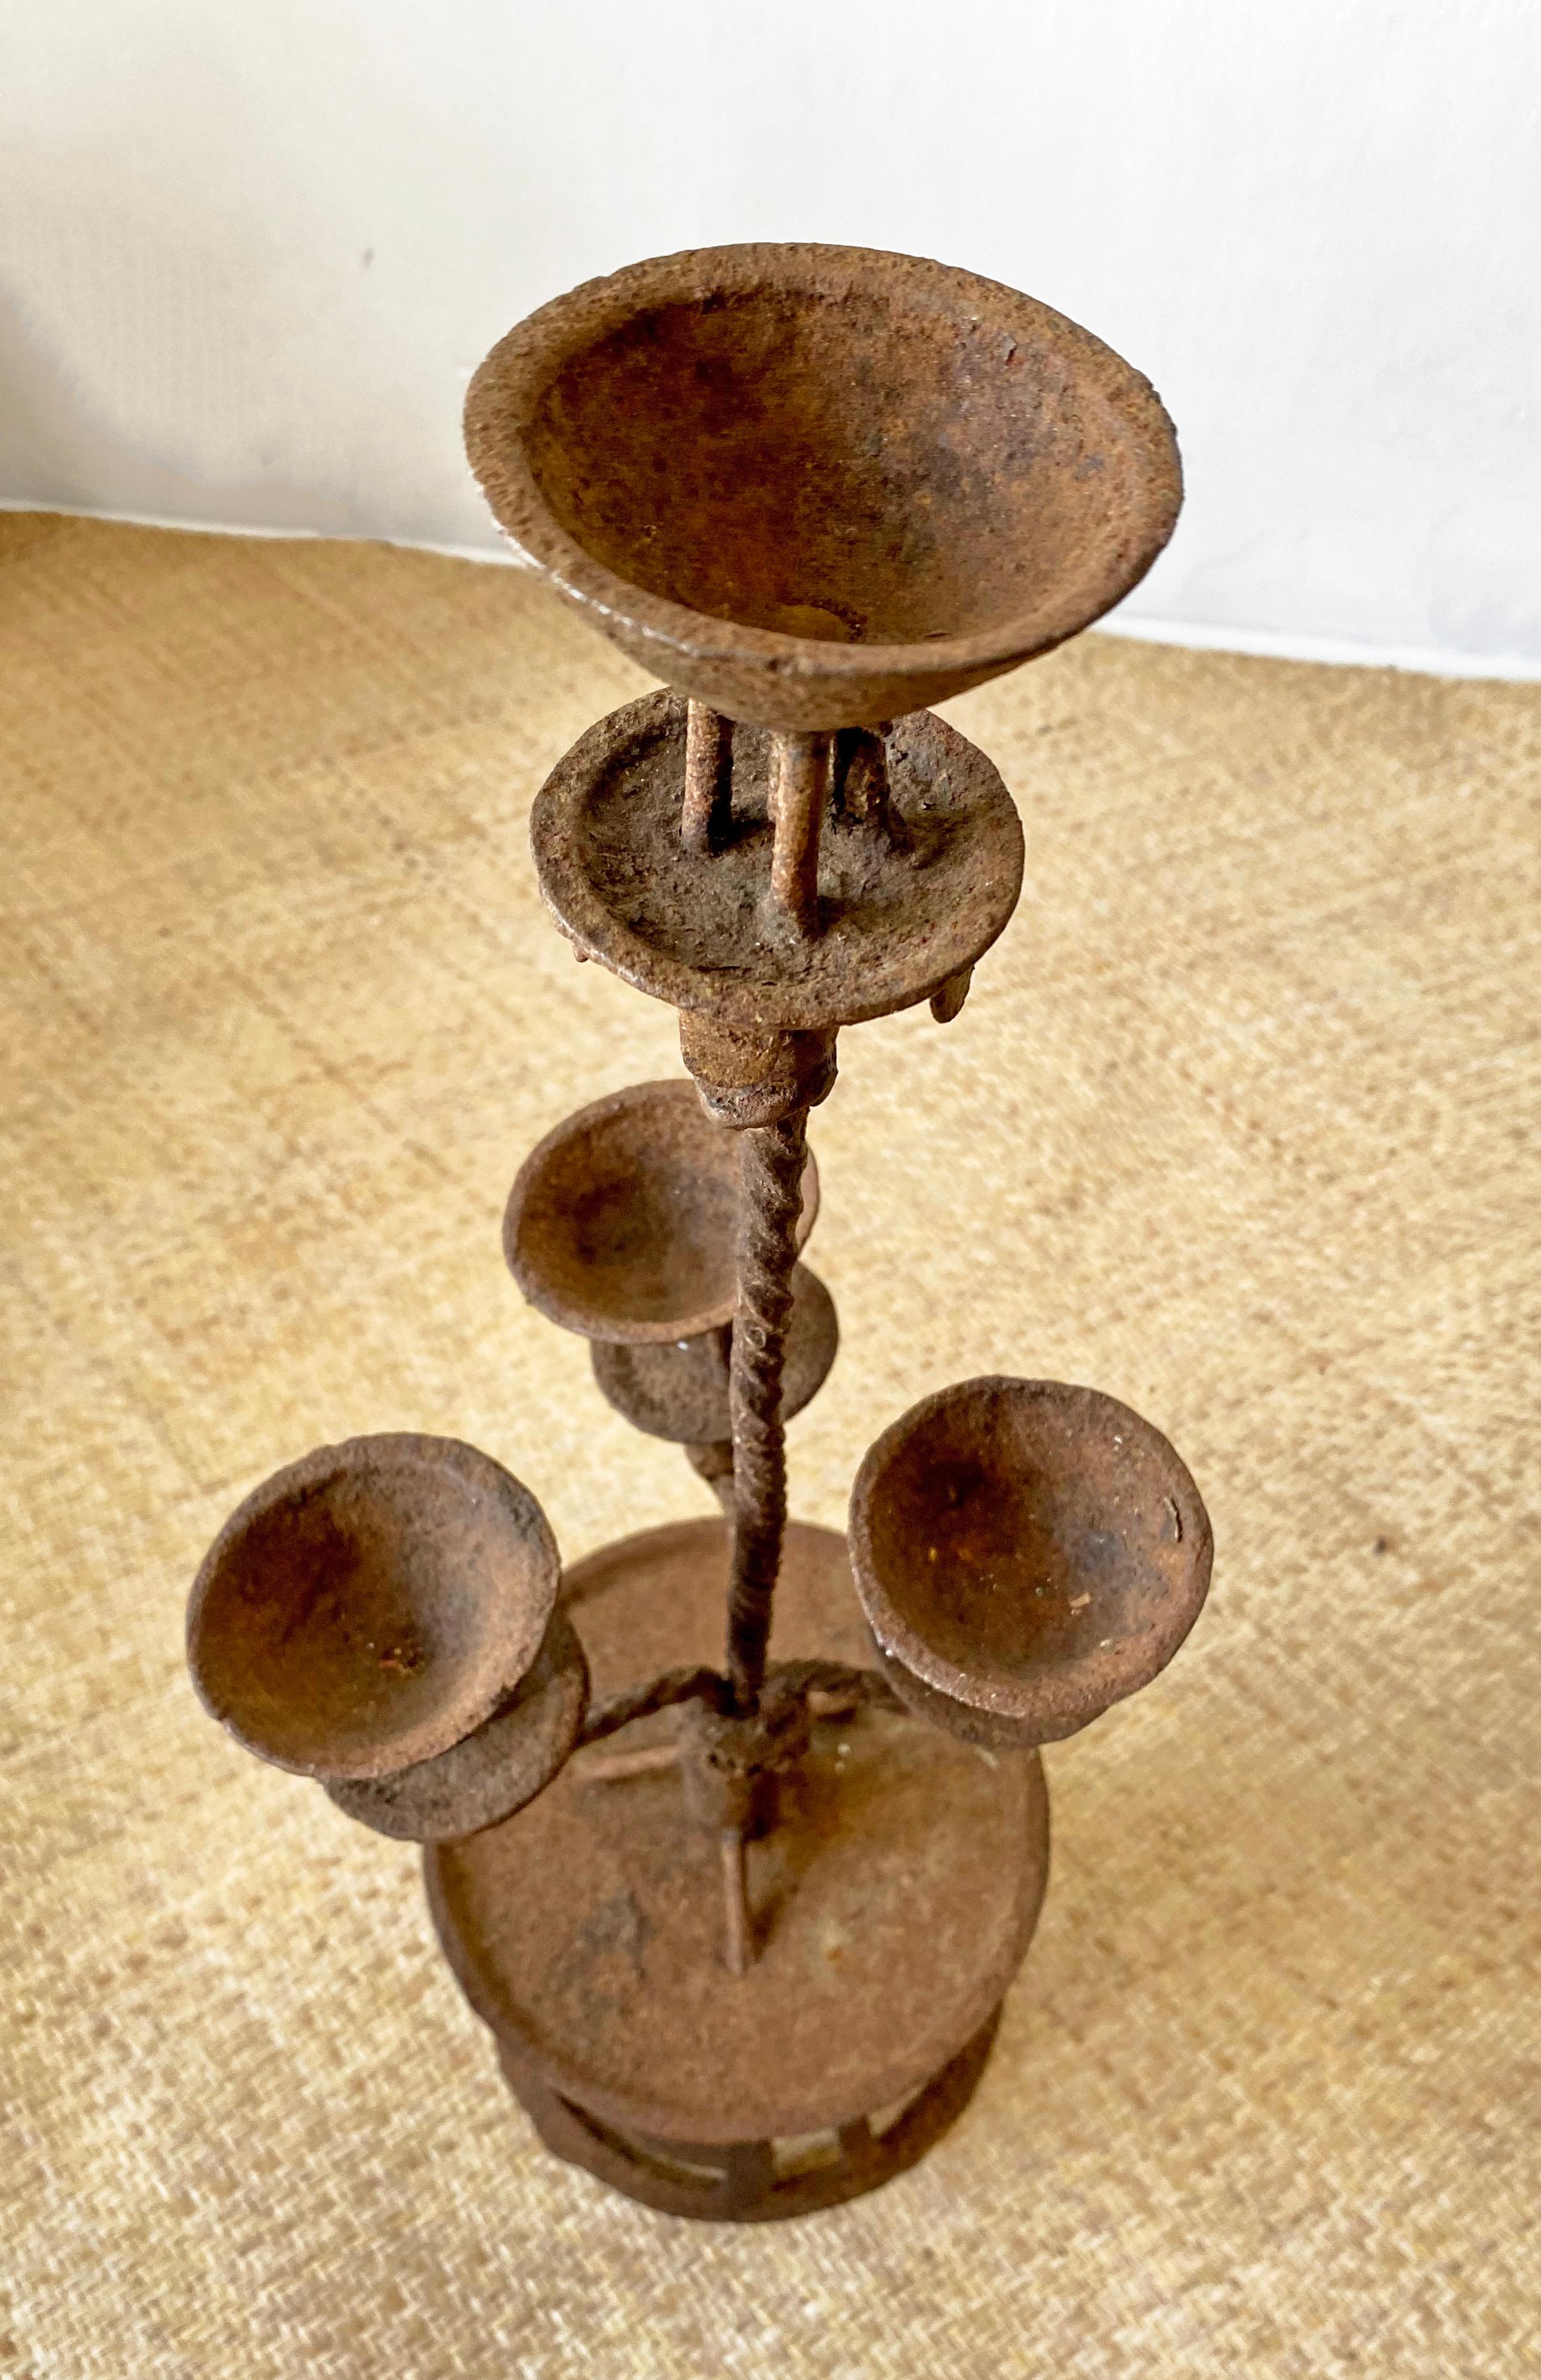 A stunning pair of early 20th century wrought iron candleholders from China with a spiral stem design and aged related patina. 

Dimensions: Height 54cm x diameter 18cm.